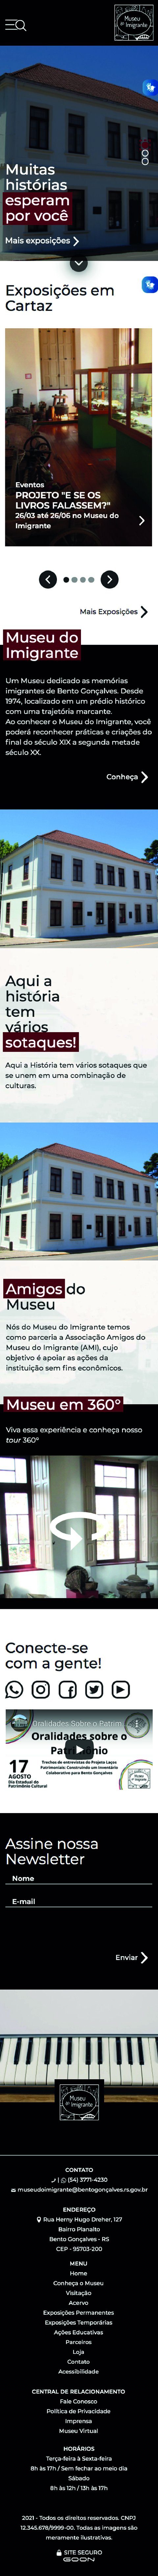 Museu do Imigrante layout mobile version